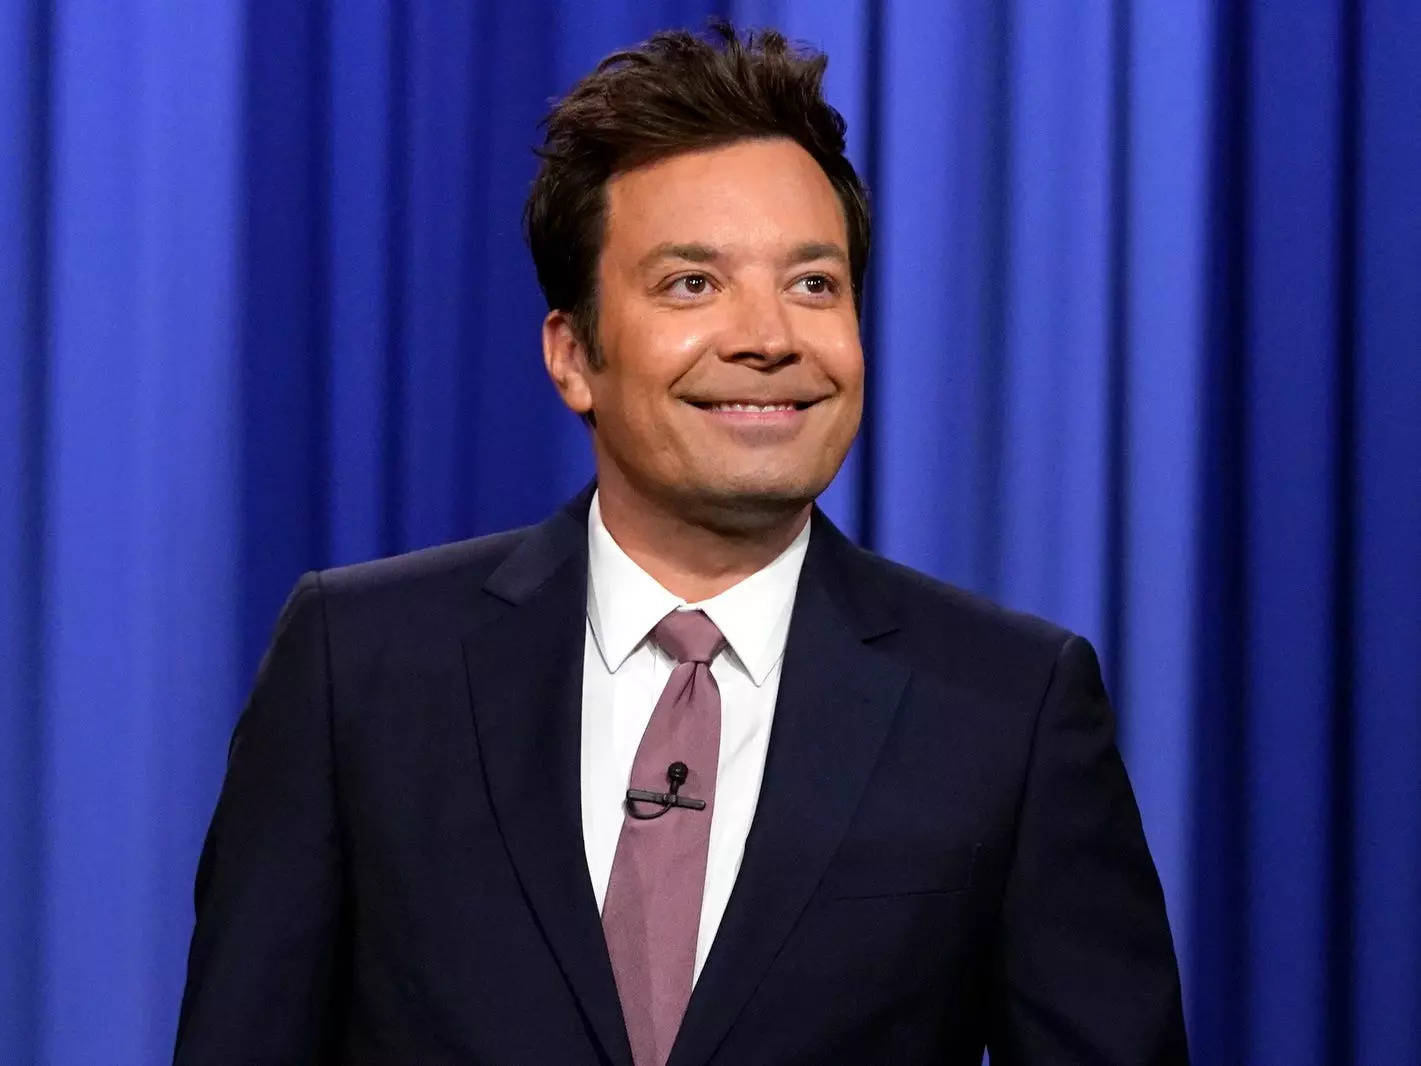 Jimmy Fallon in a suit and tie in front of a blue curtain.